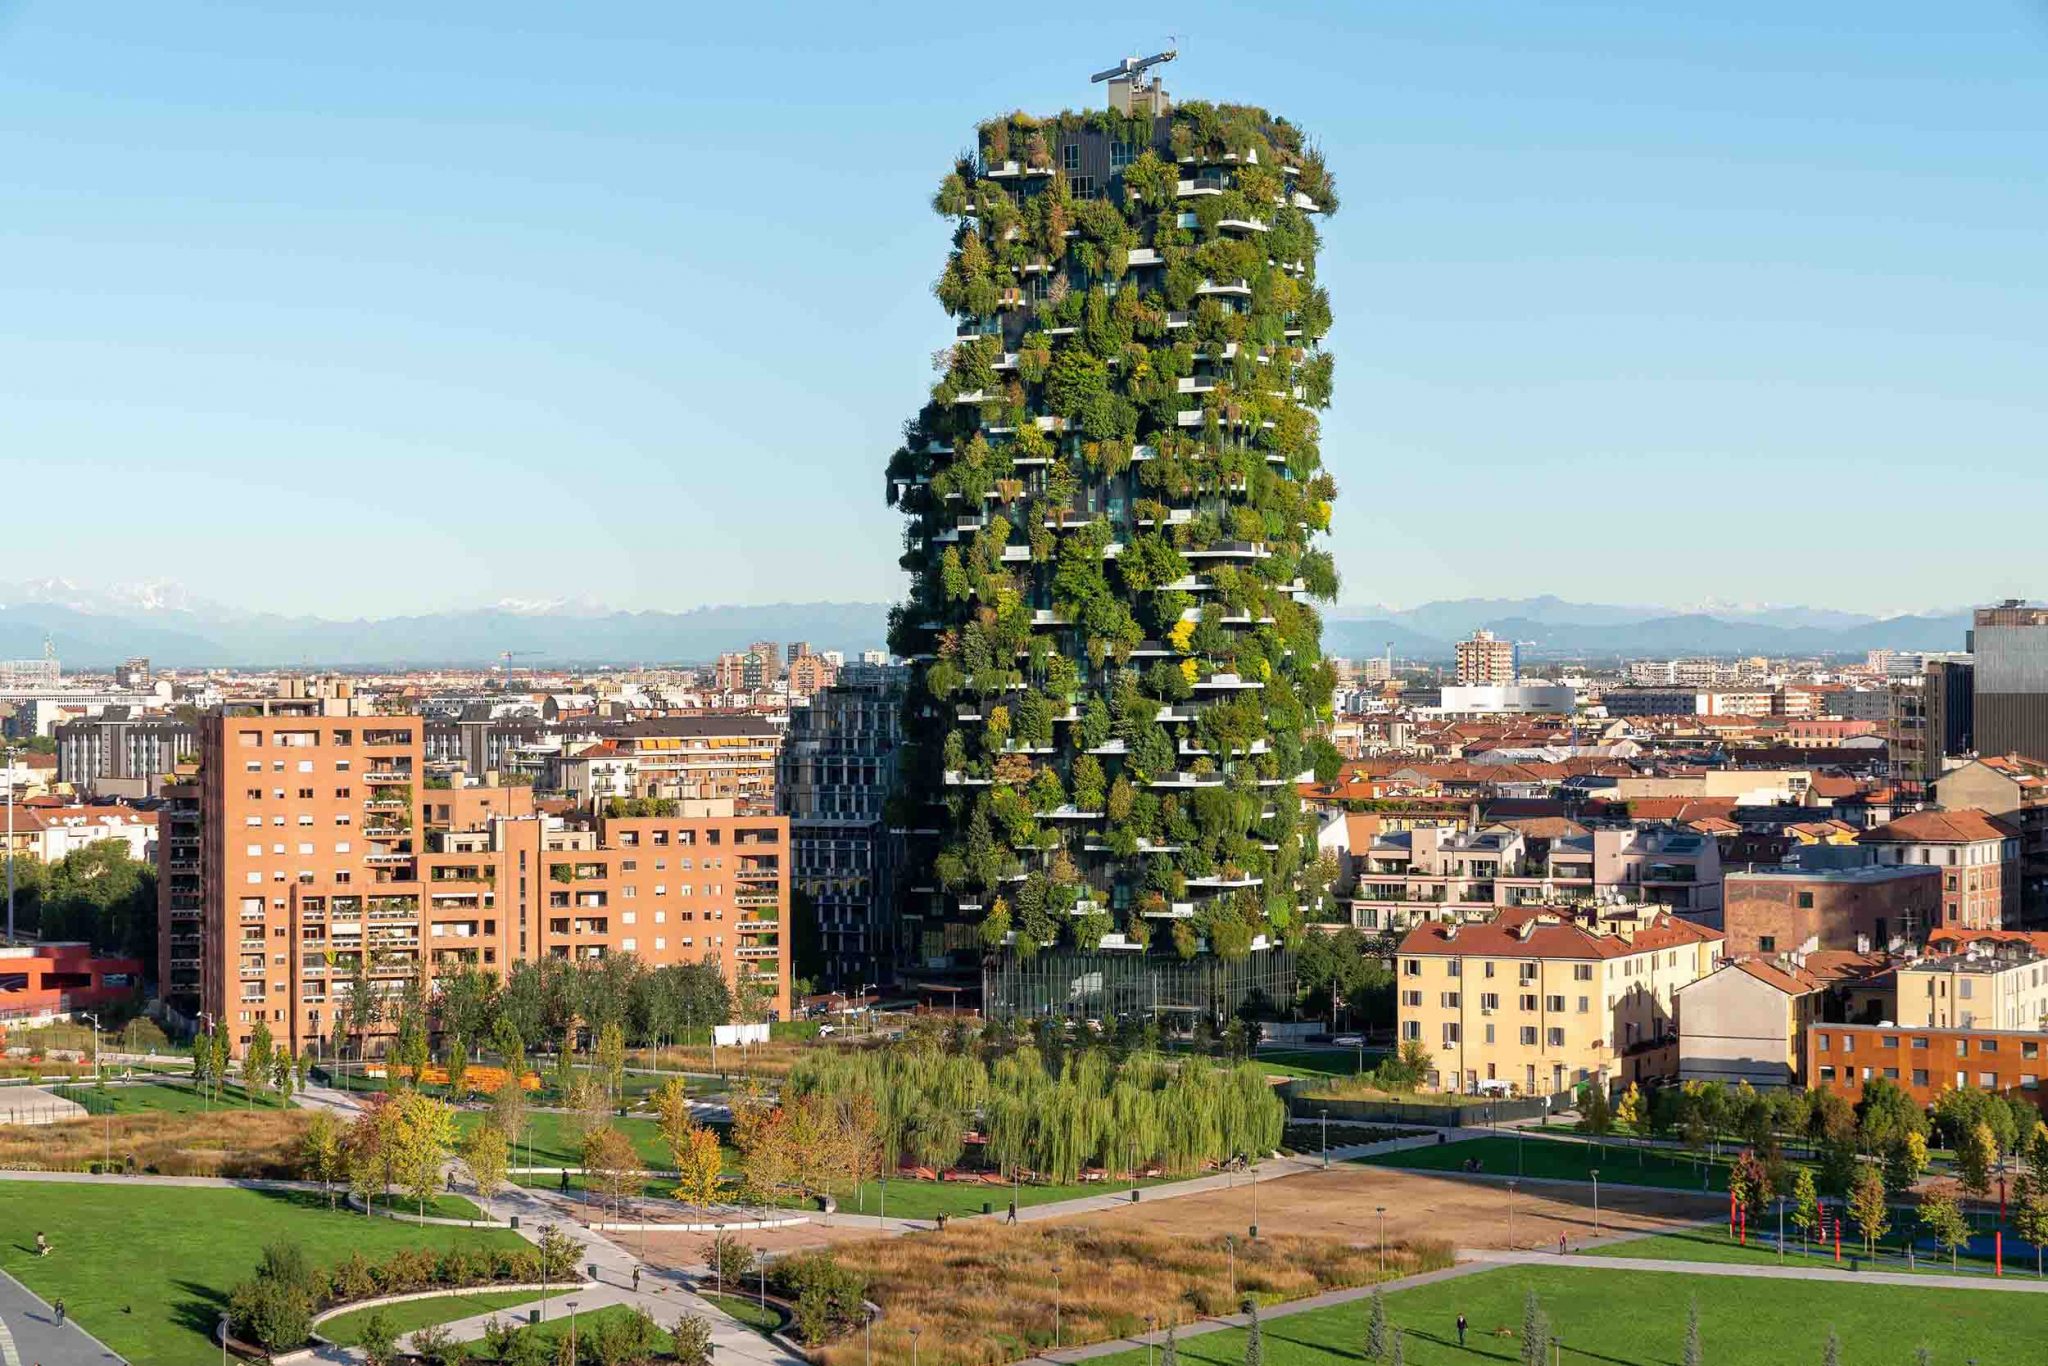 Bosco Verticale, architectural biodiversity – a new alliance between  forests and architecture